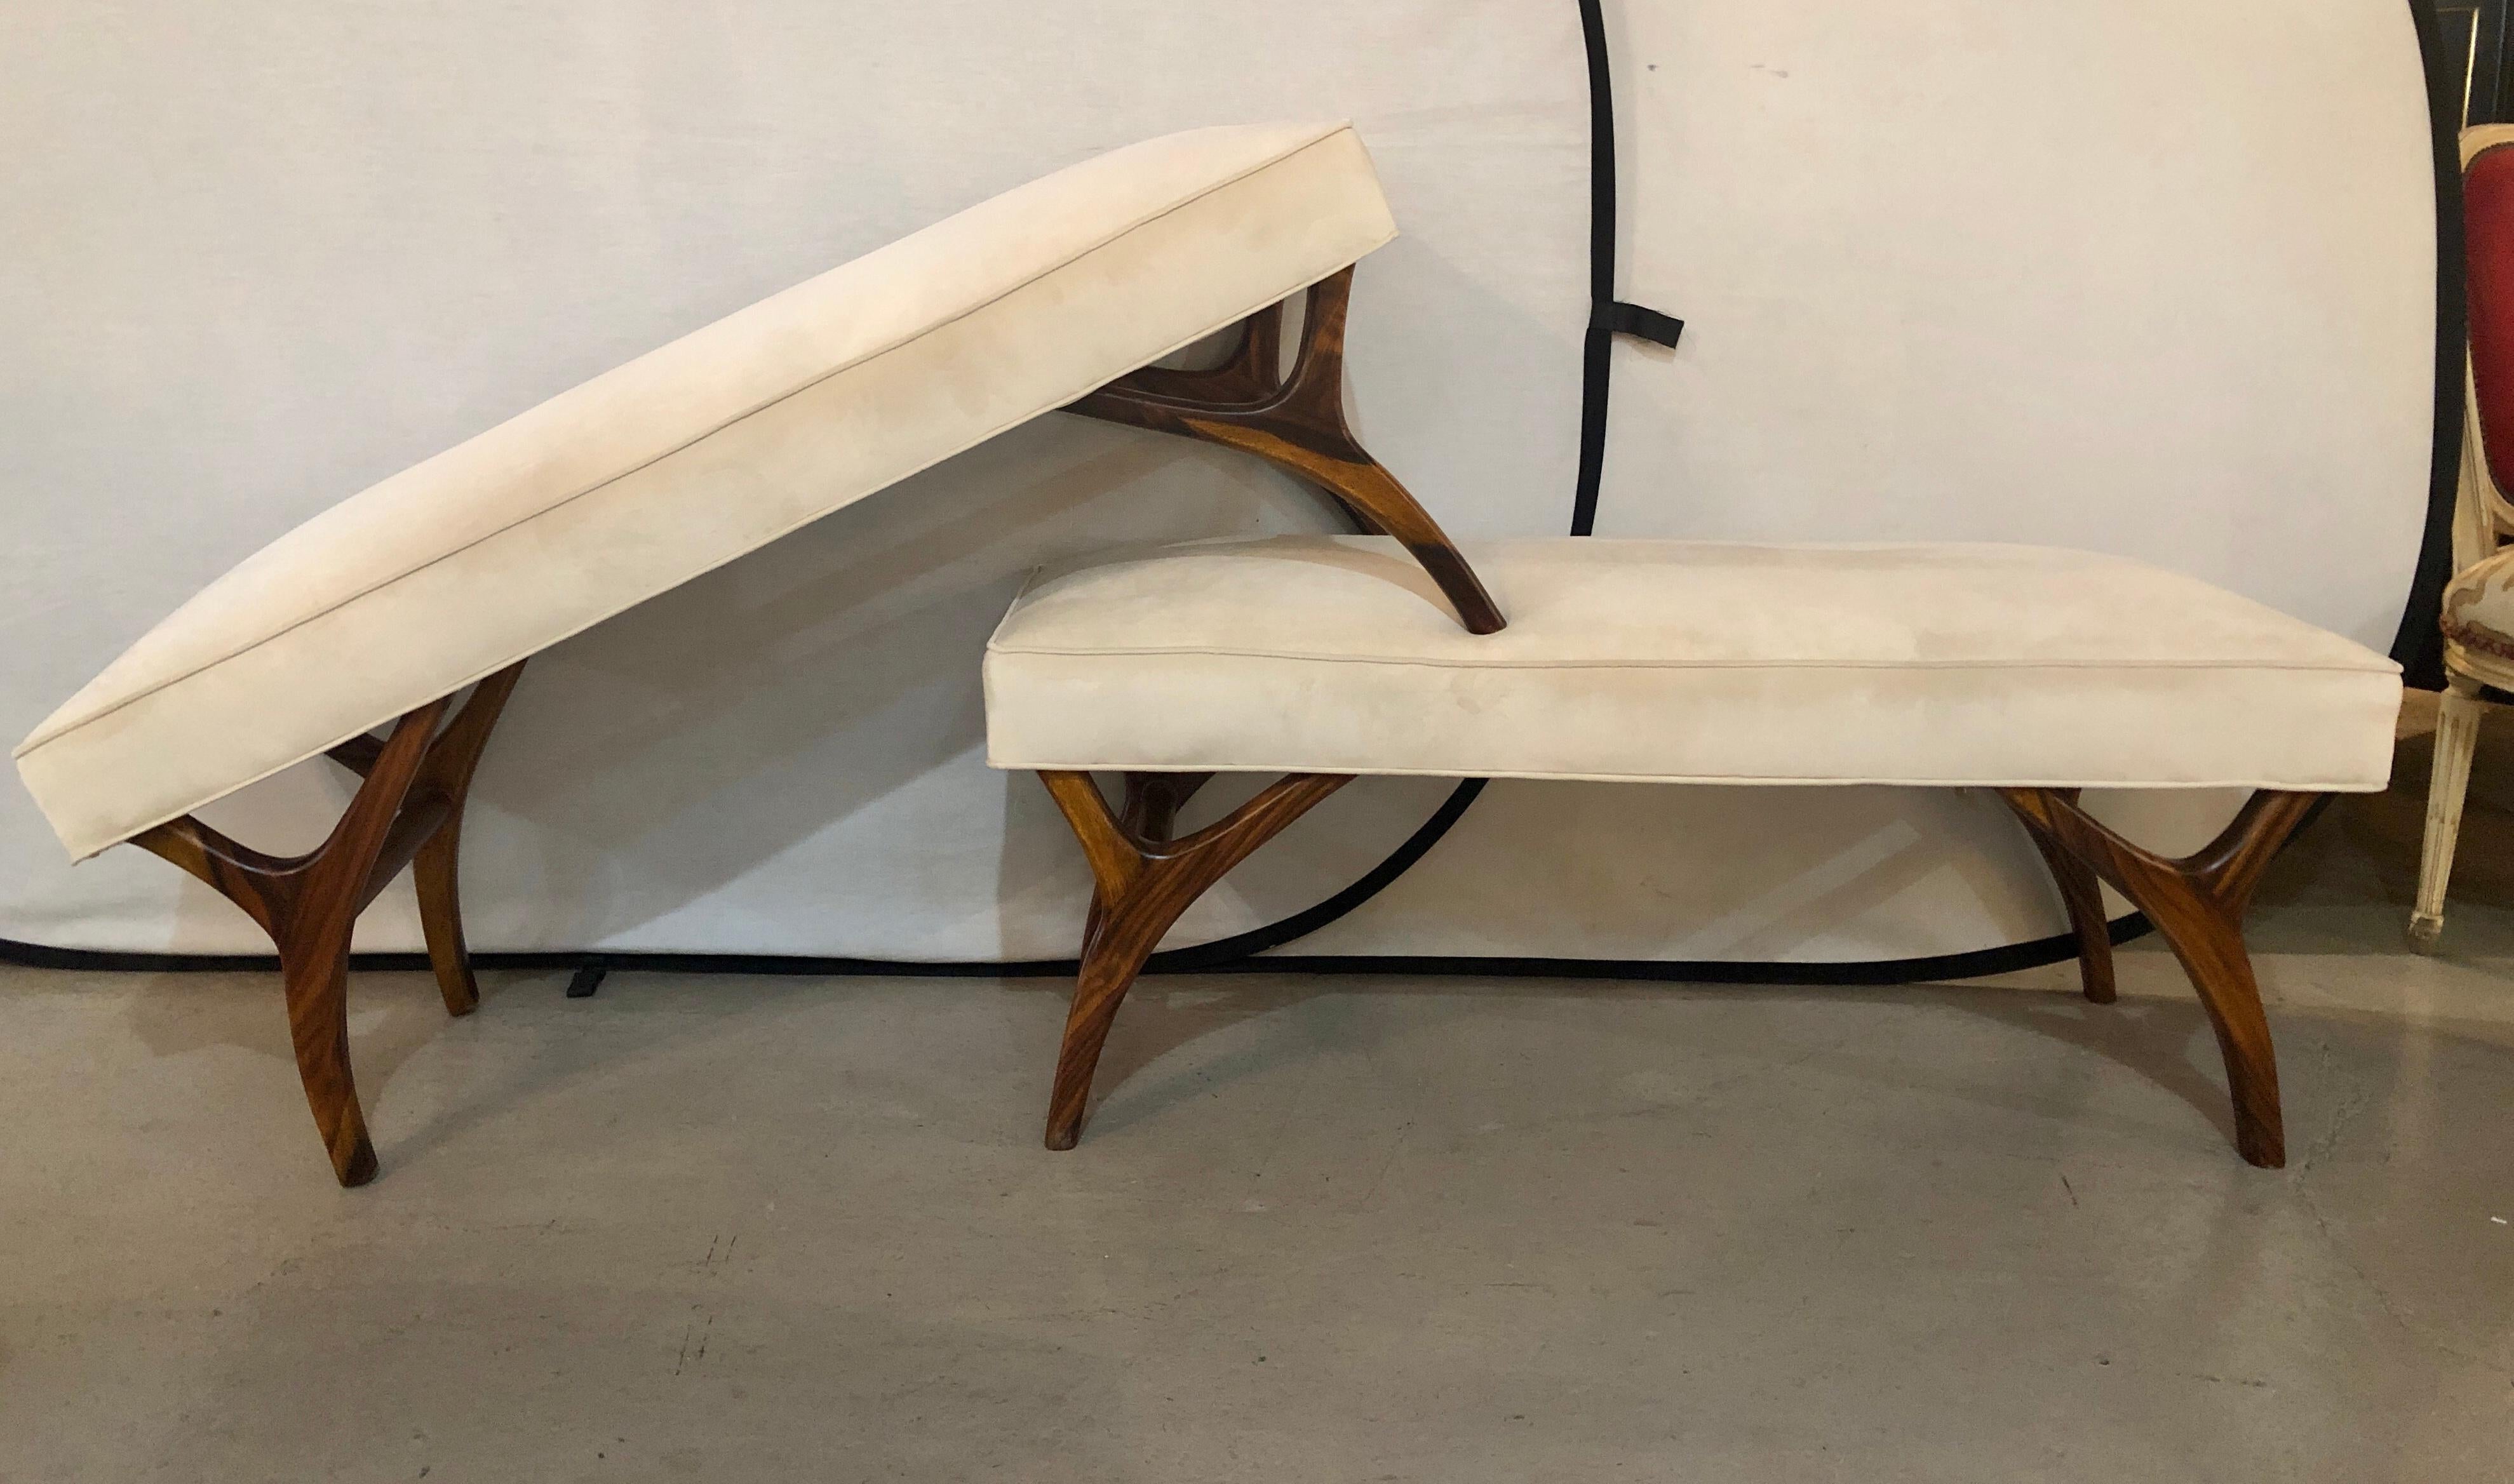 20th Century Pair of Mid-Century Modern Window Benches or Stools